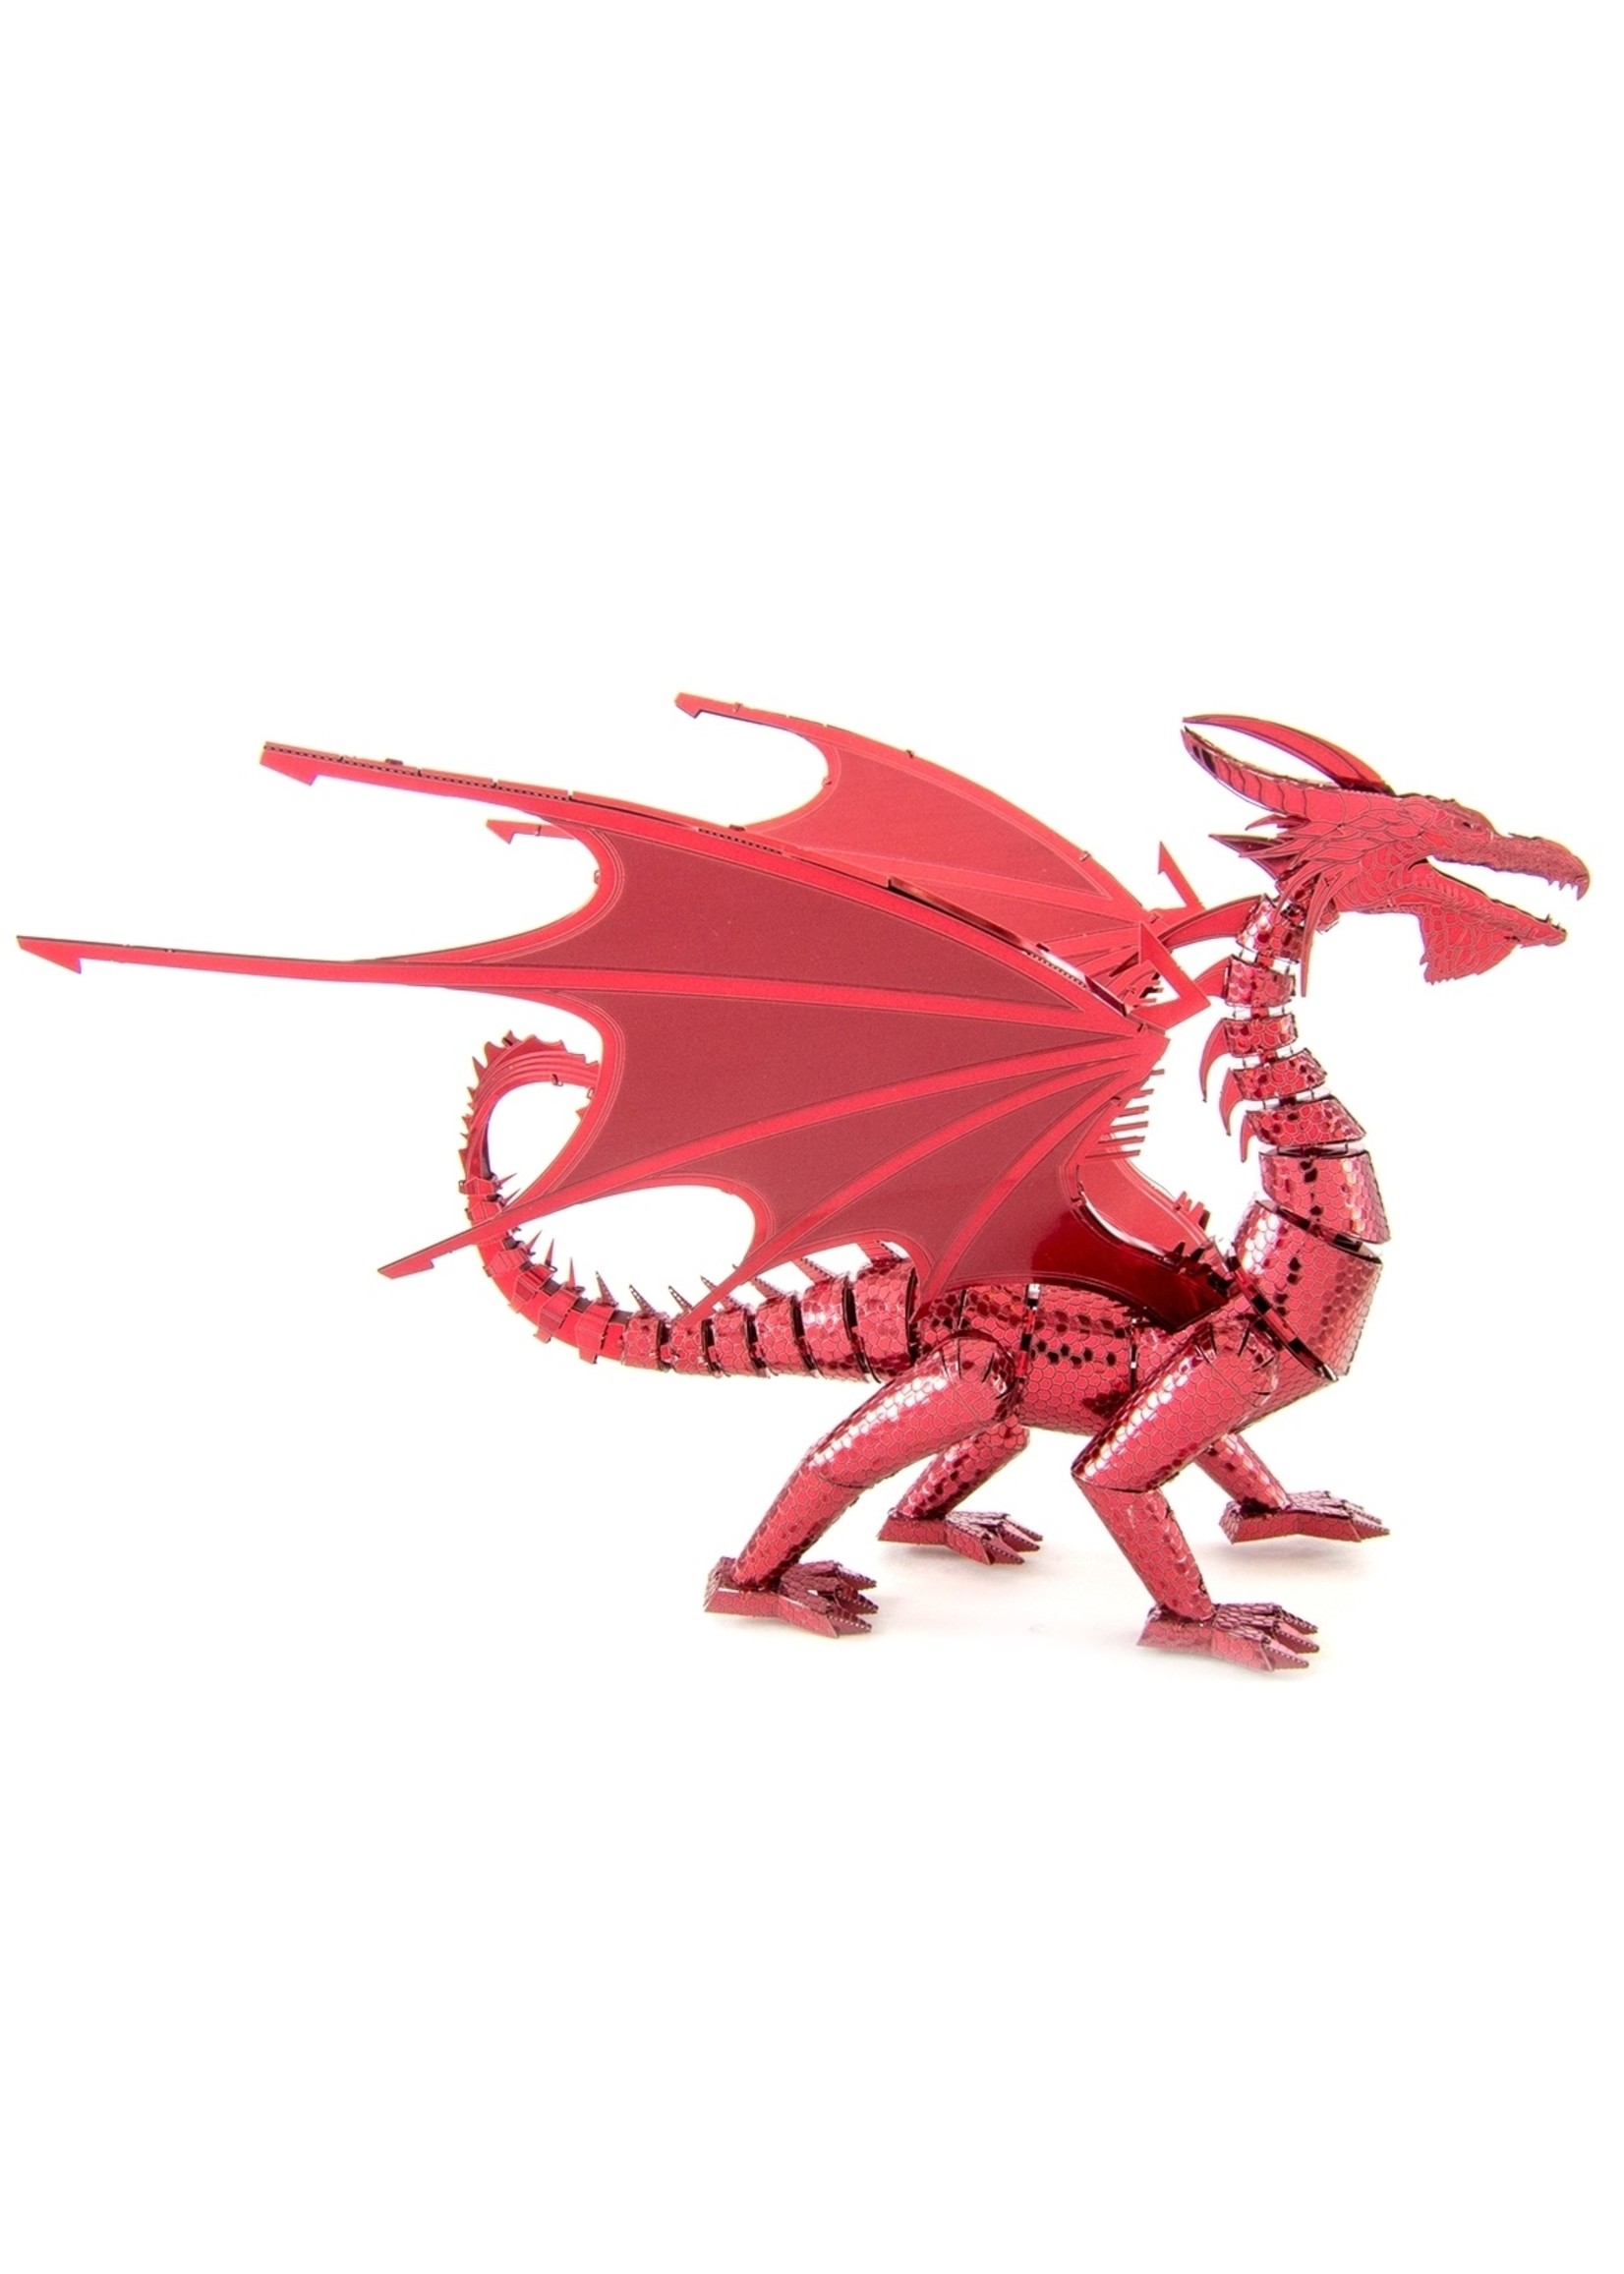 Fascinations Metal Earth - Red Dragon ICX